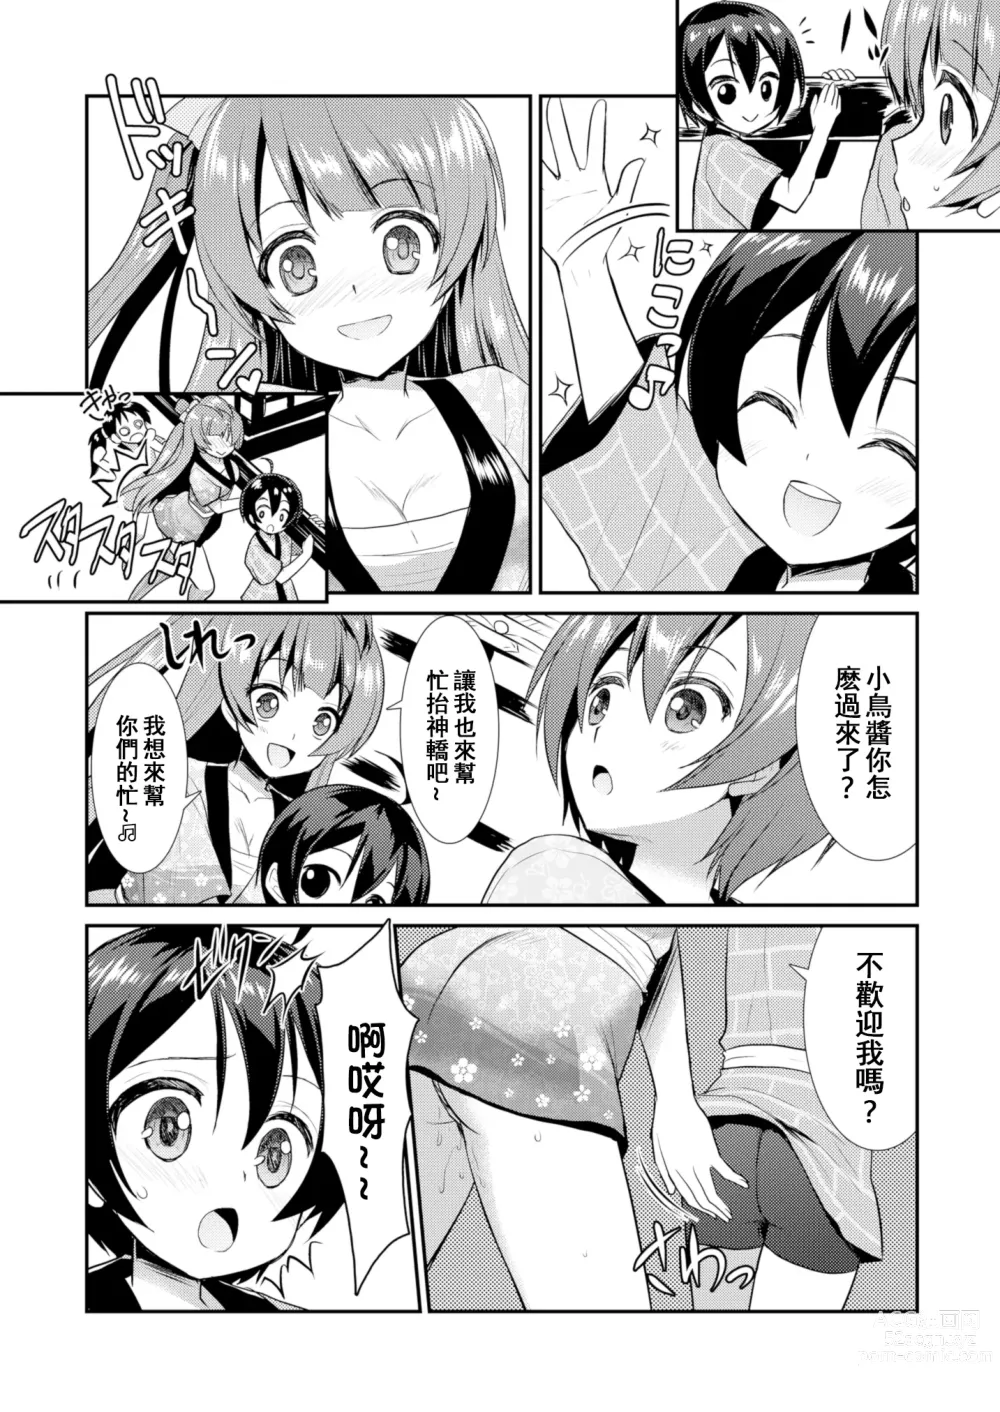 Page 10 of doujinshi Eat Meat Girl 3